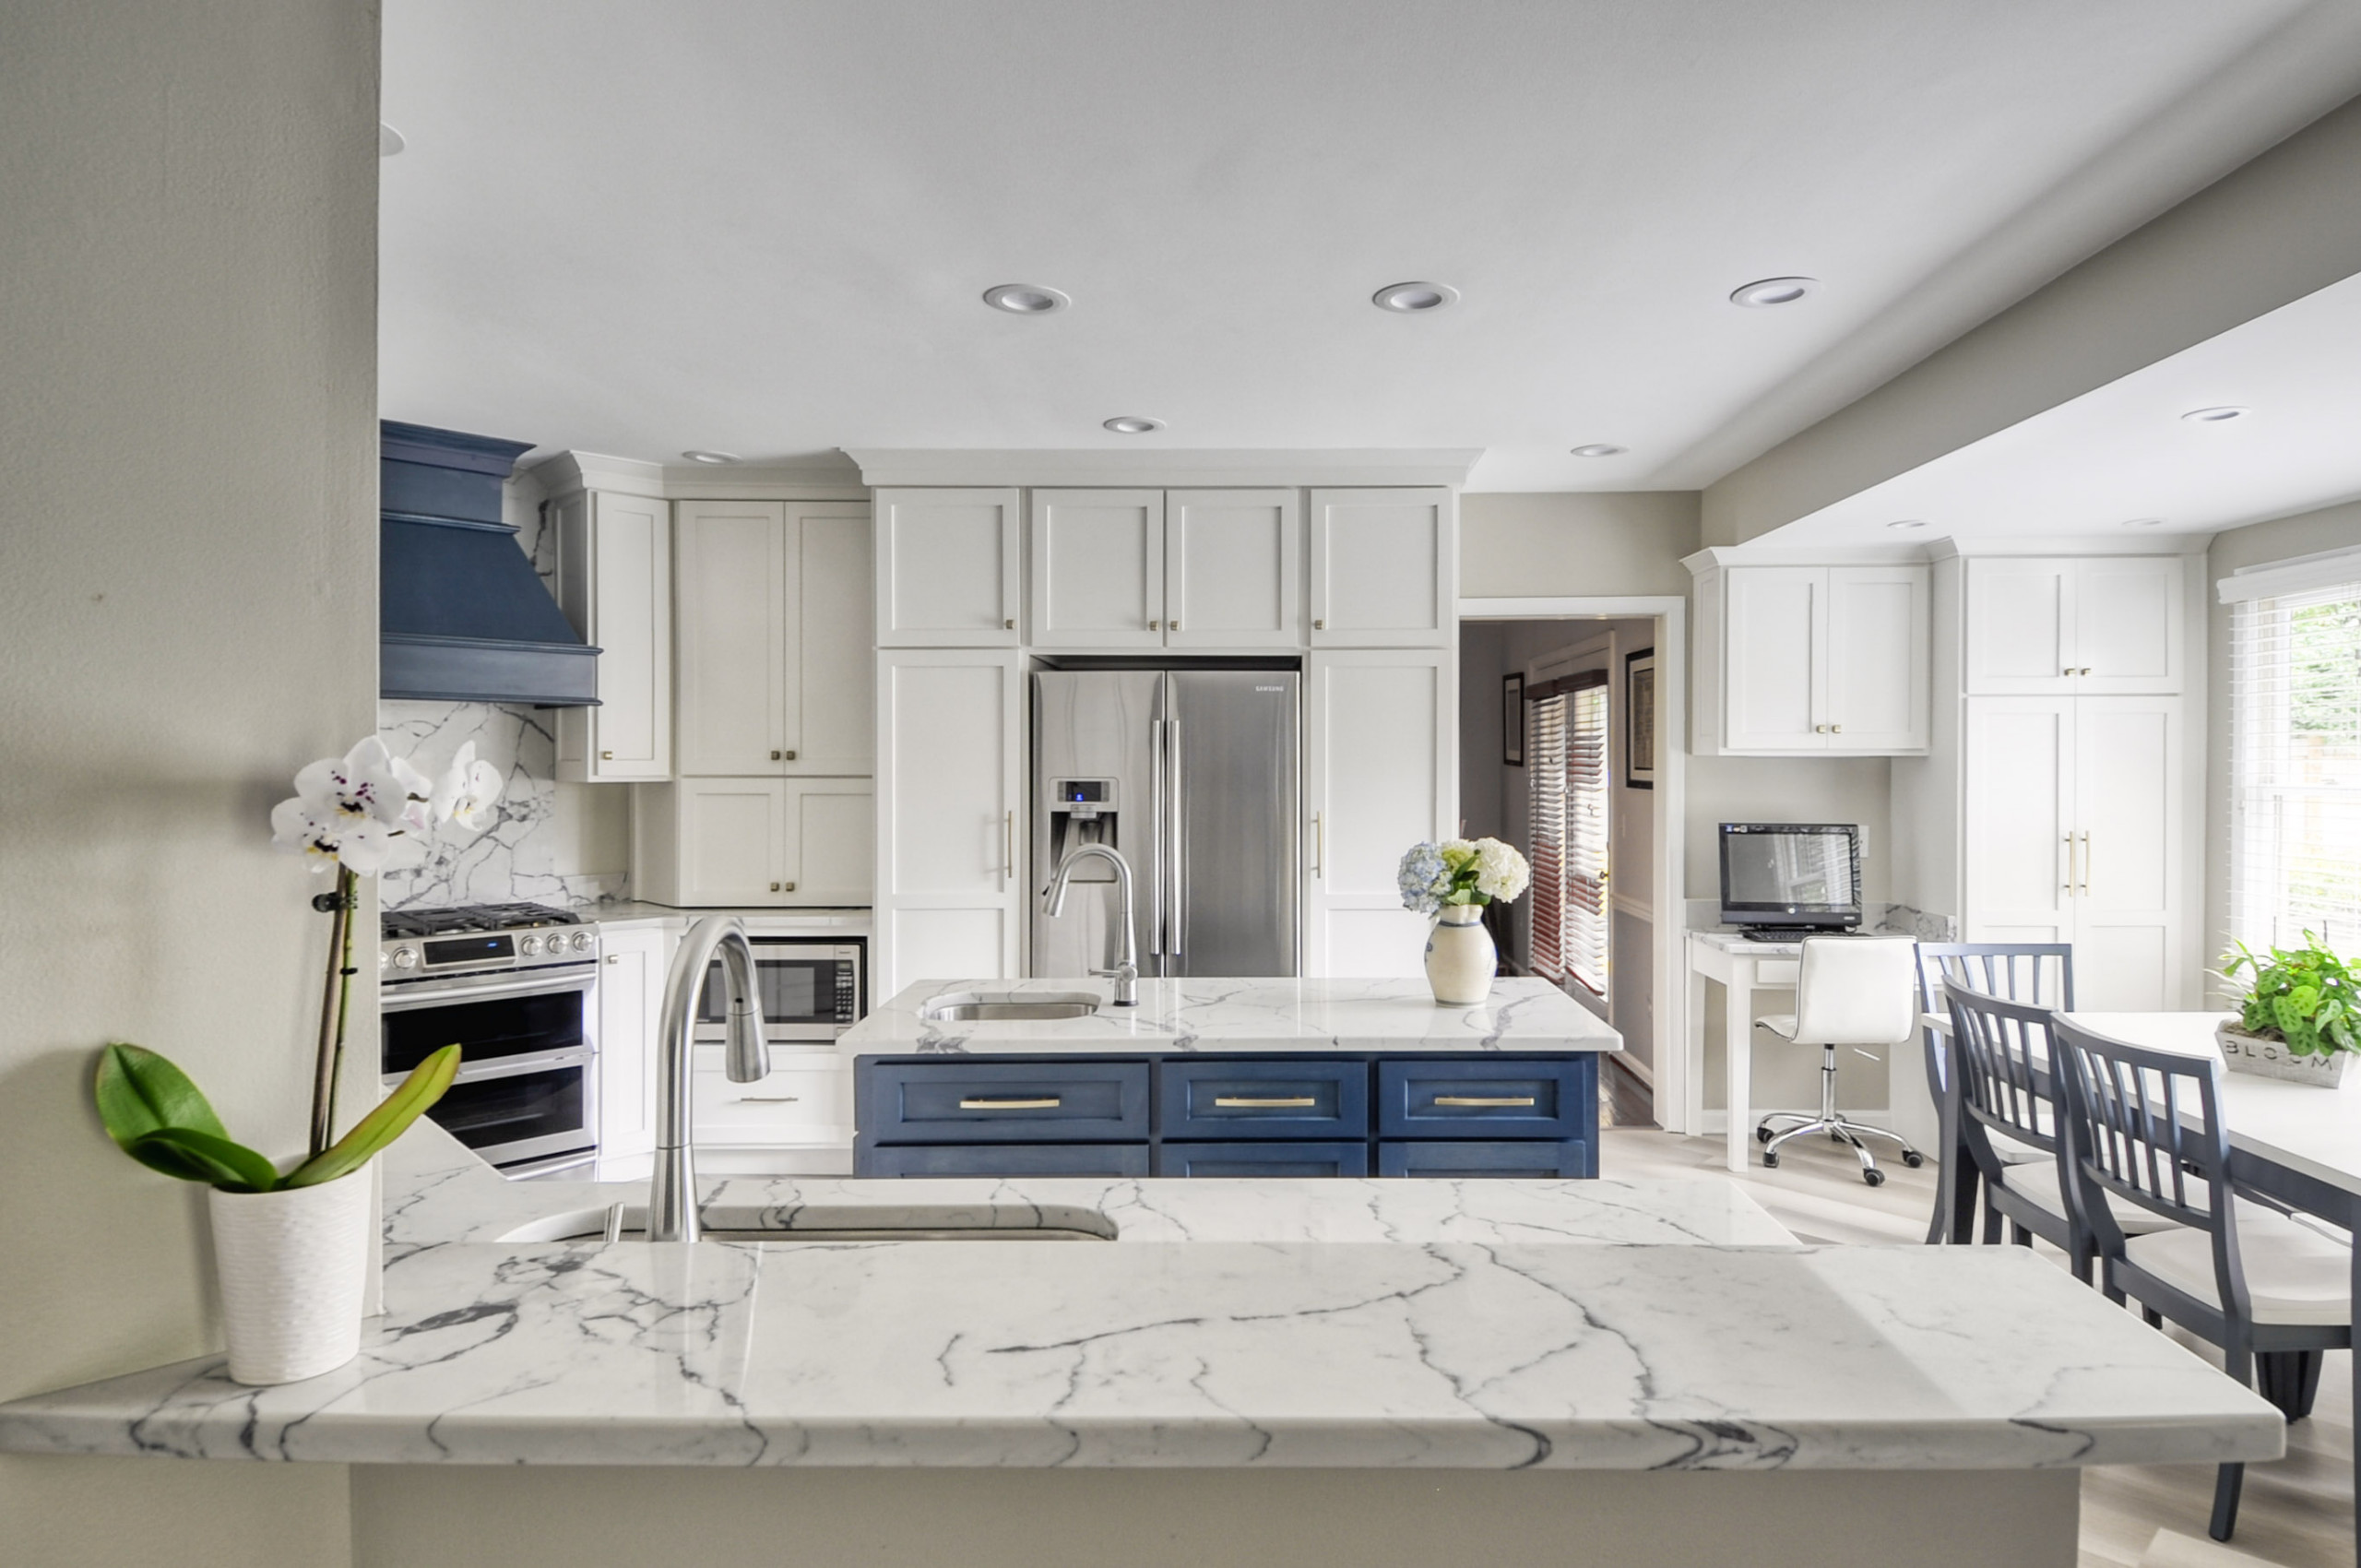 Navy Stained Island, Hood vent and Floating Shelves in White Shaker Kitchen  - Transitional - Kitchen - DC Metro - by Kim Johnson Designs, LLC | Houzz